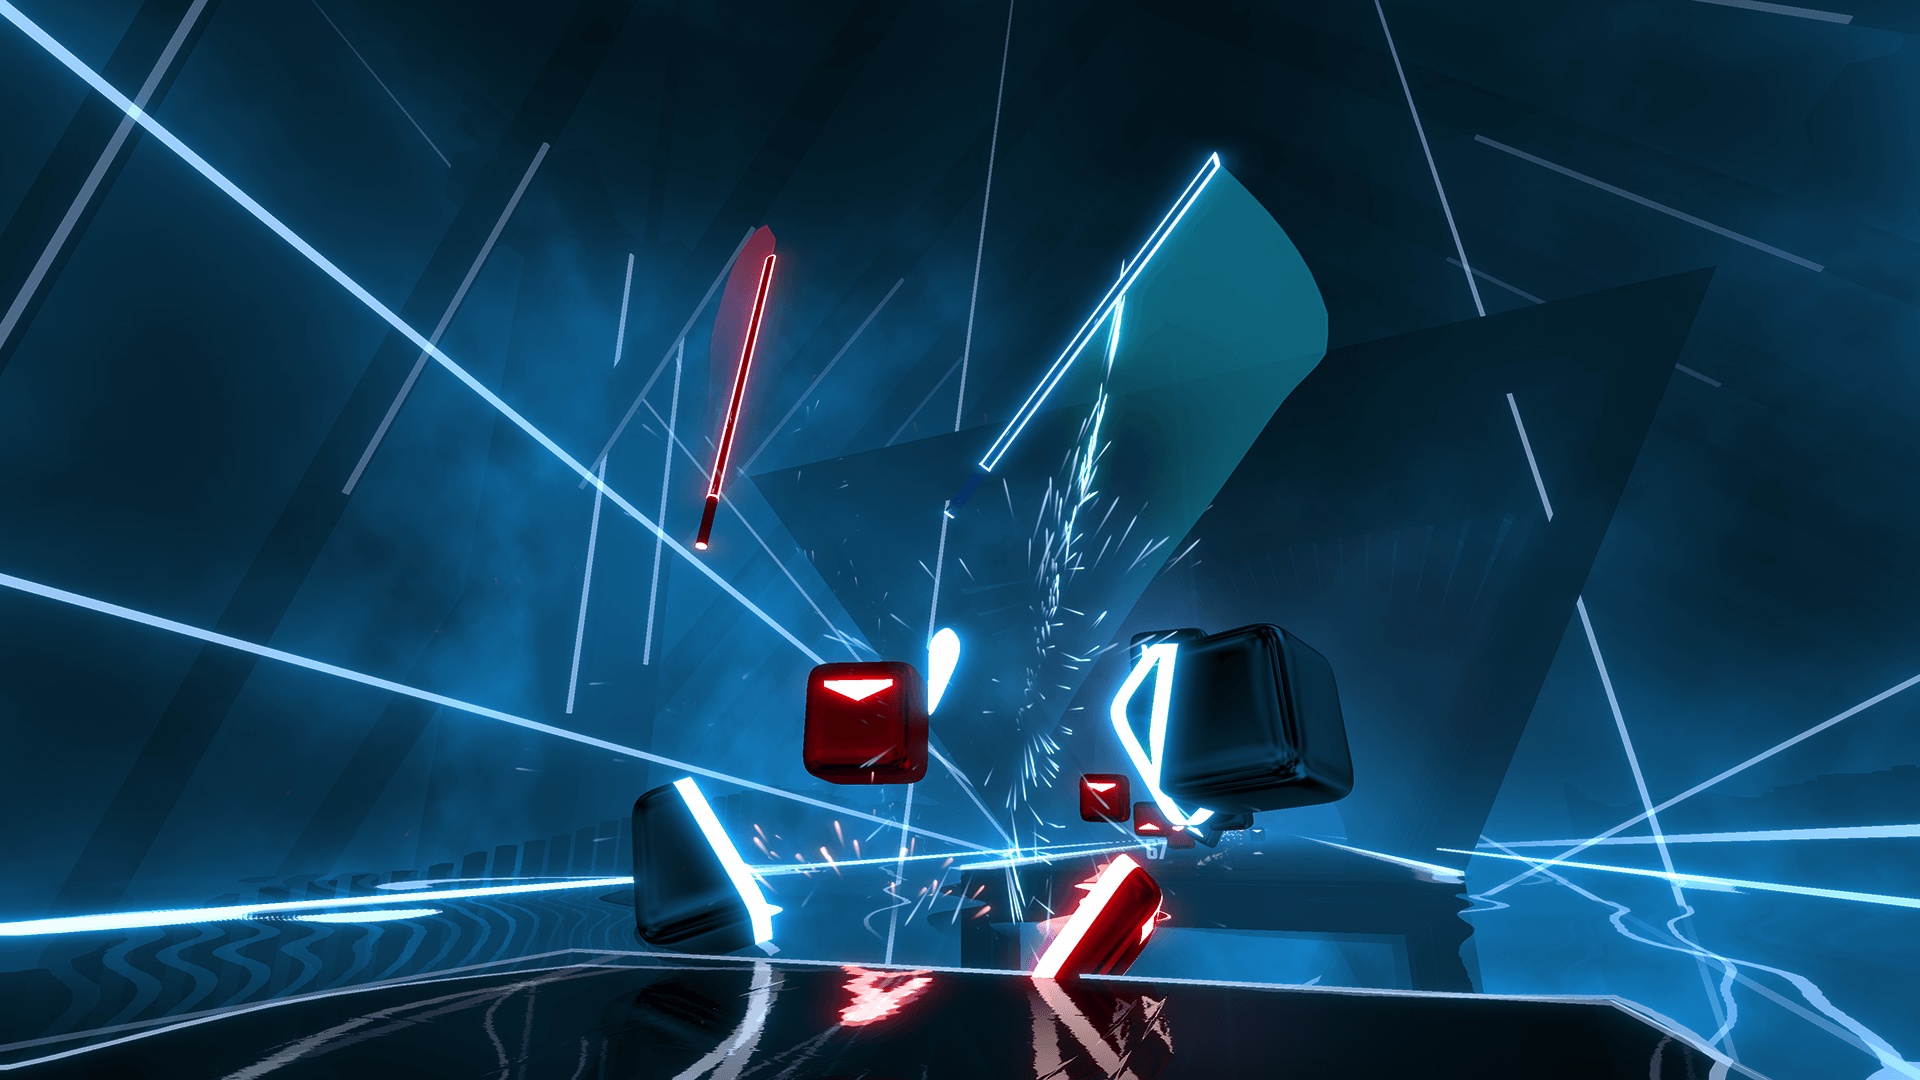 Beat Games, Beat Saber, Beat Saber Review, Family, Great Soundtrack, Hyperbolic Magnetism, indie, Music, party, Rating 8/10, Rhythm, VR